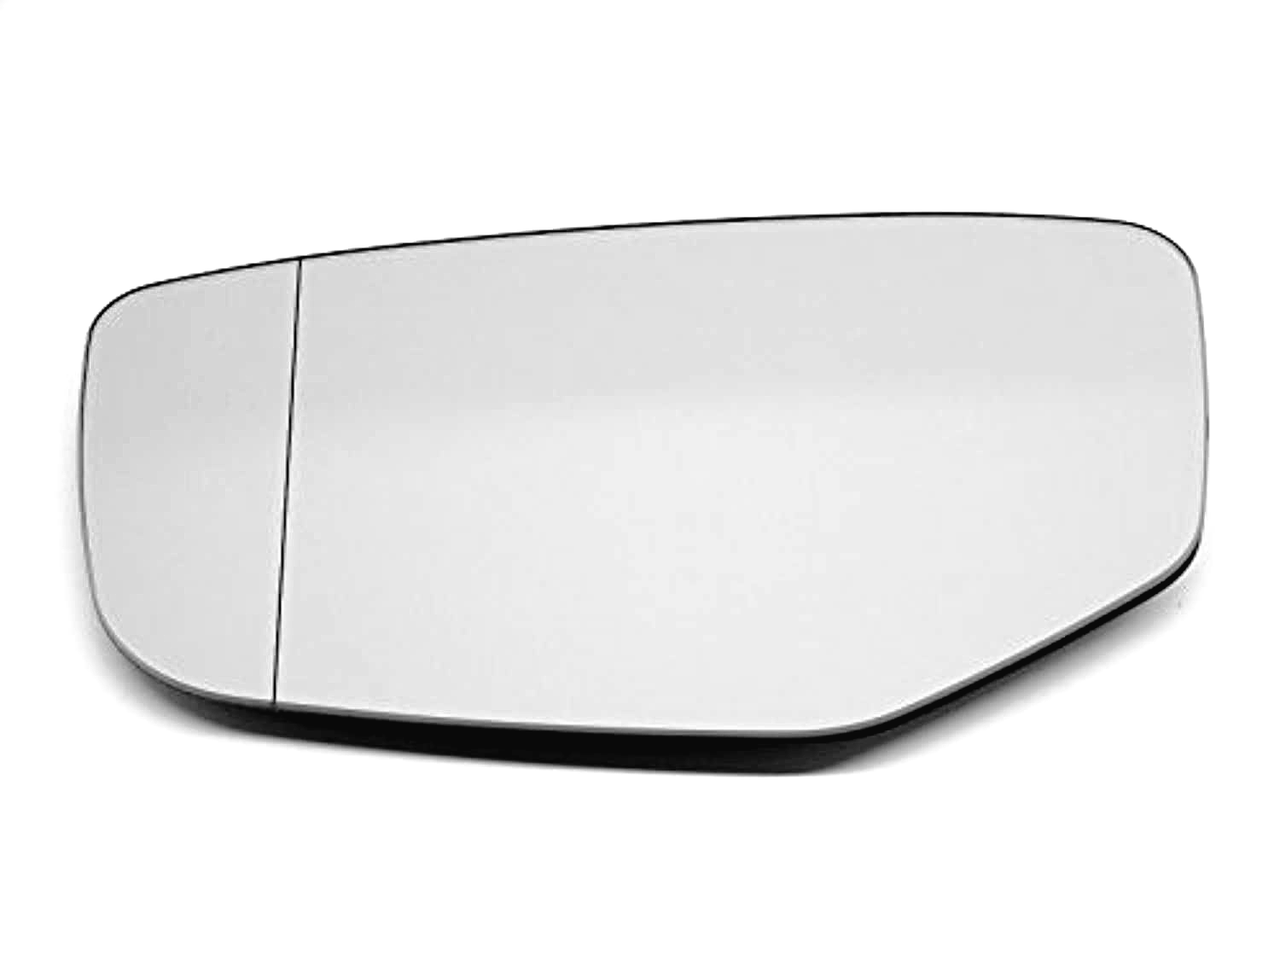 Genuine Honda Accord 76253-T2F-A01 Mirror Glass w/ Holder, Left Driver Models w/out Signal in Housing